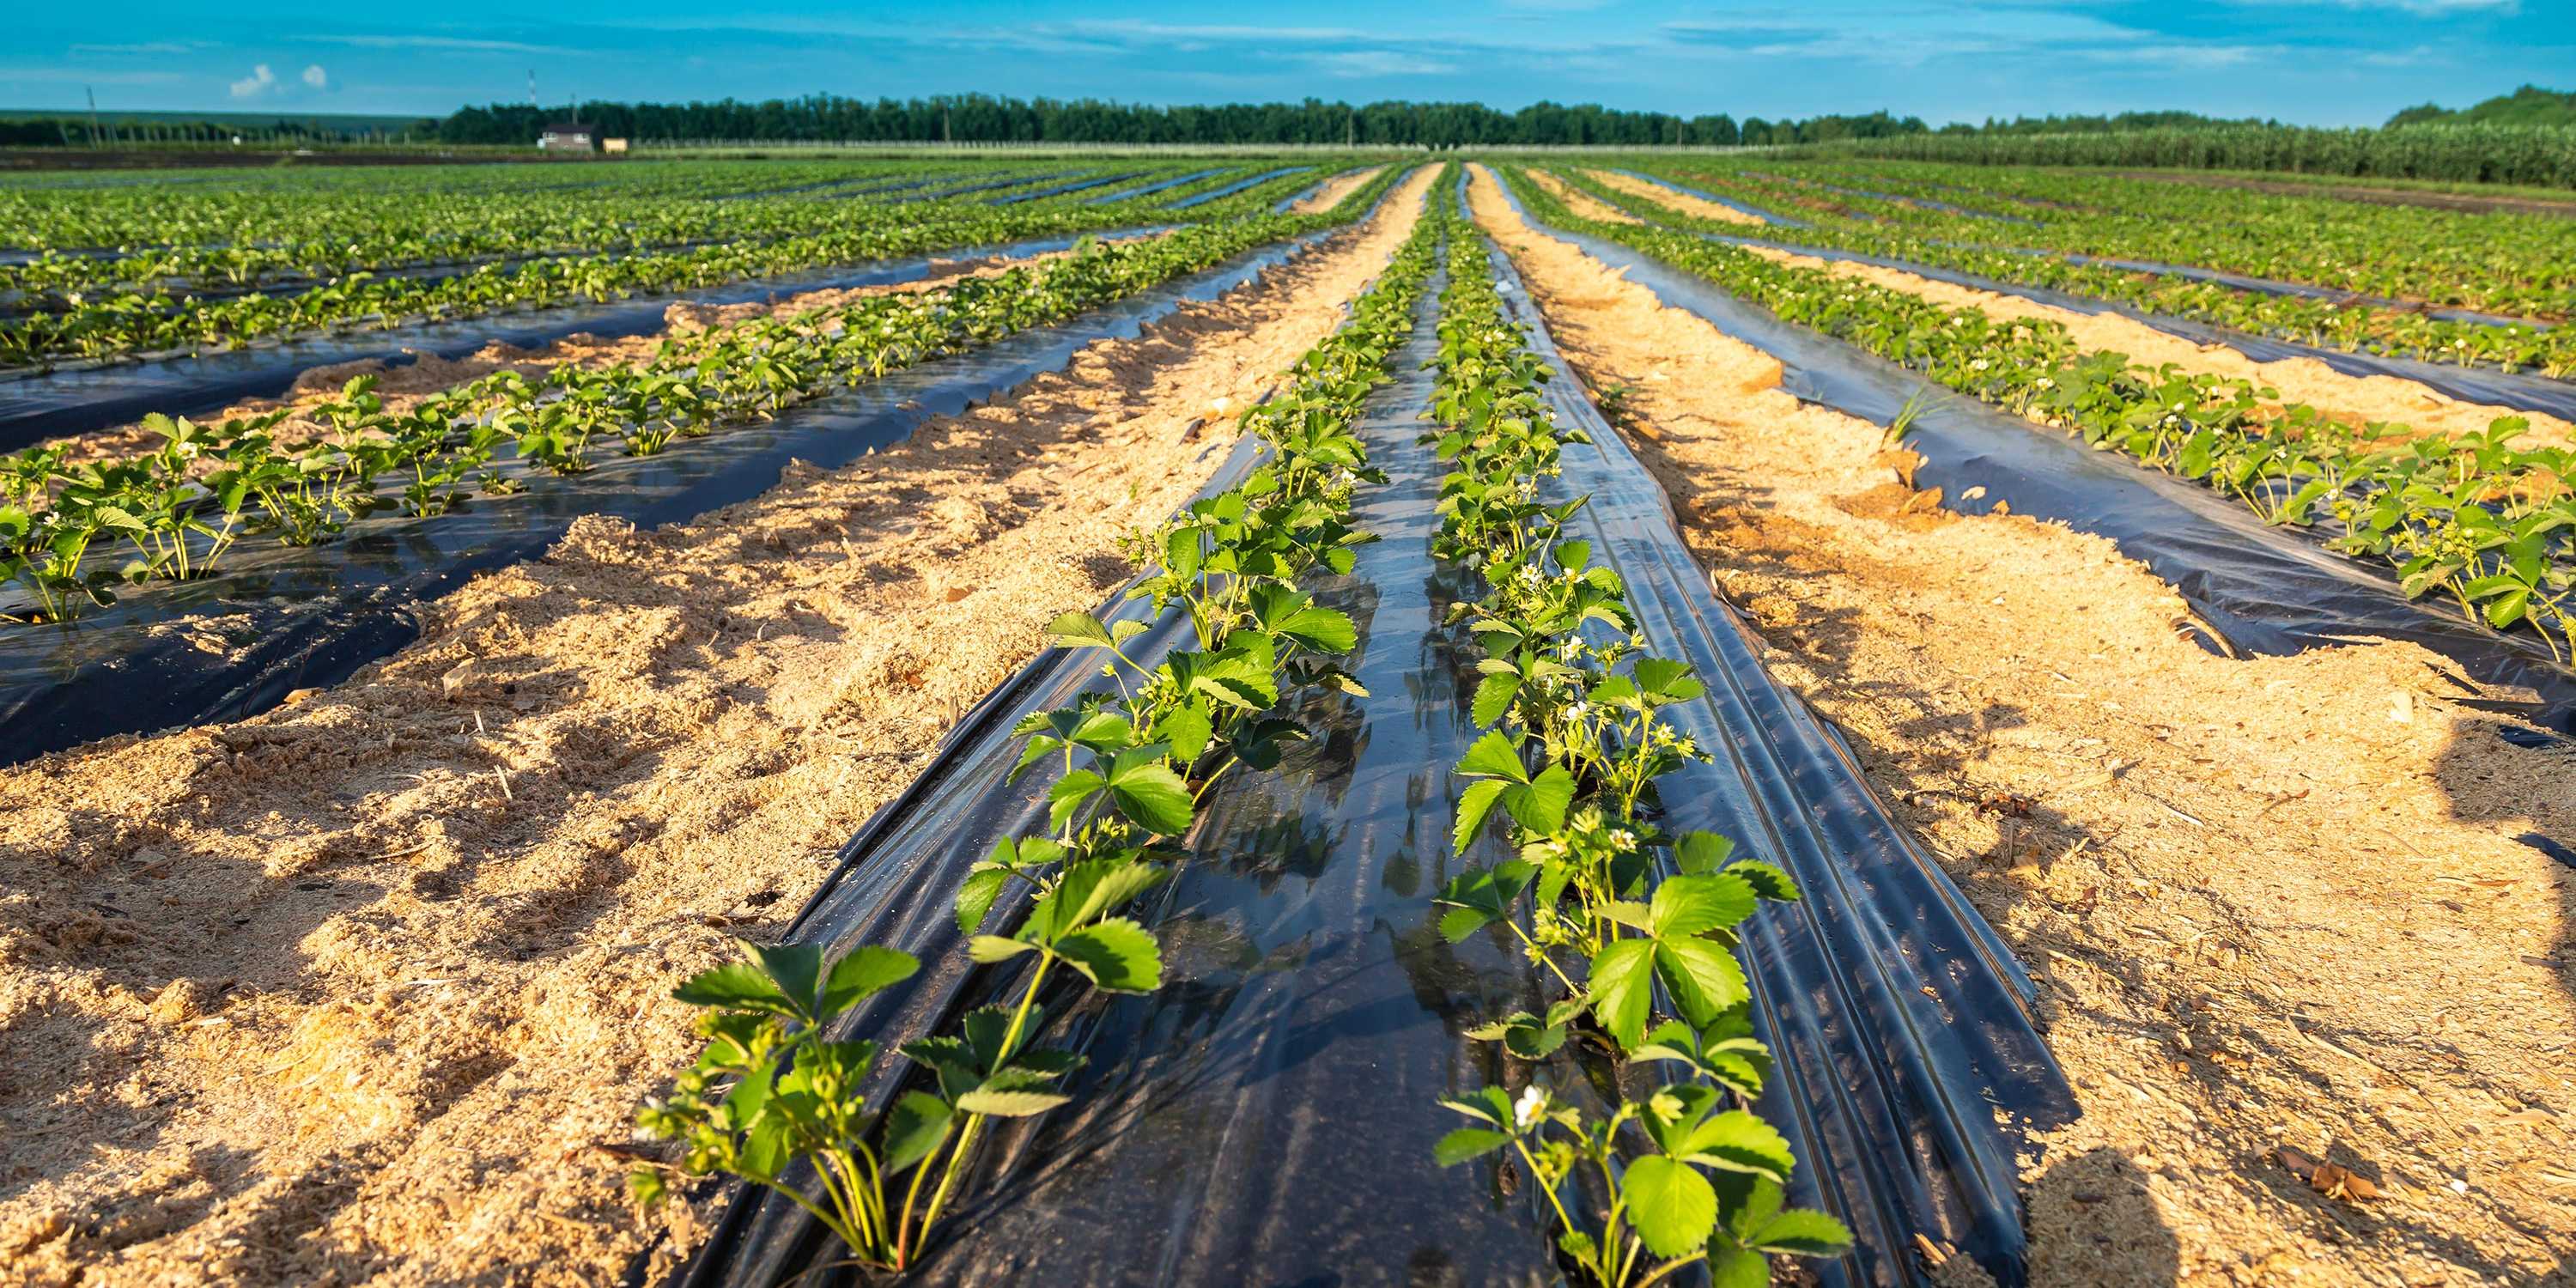 Strawberry plants in rows, plastic film covers the soil under the plants